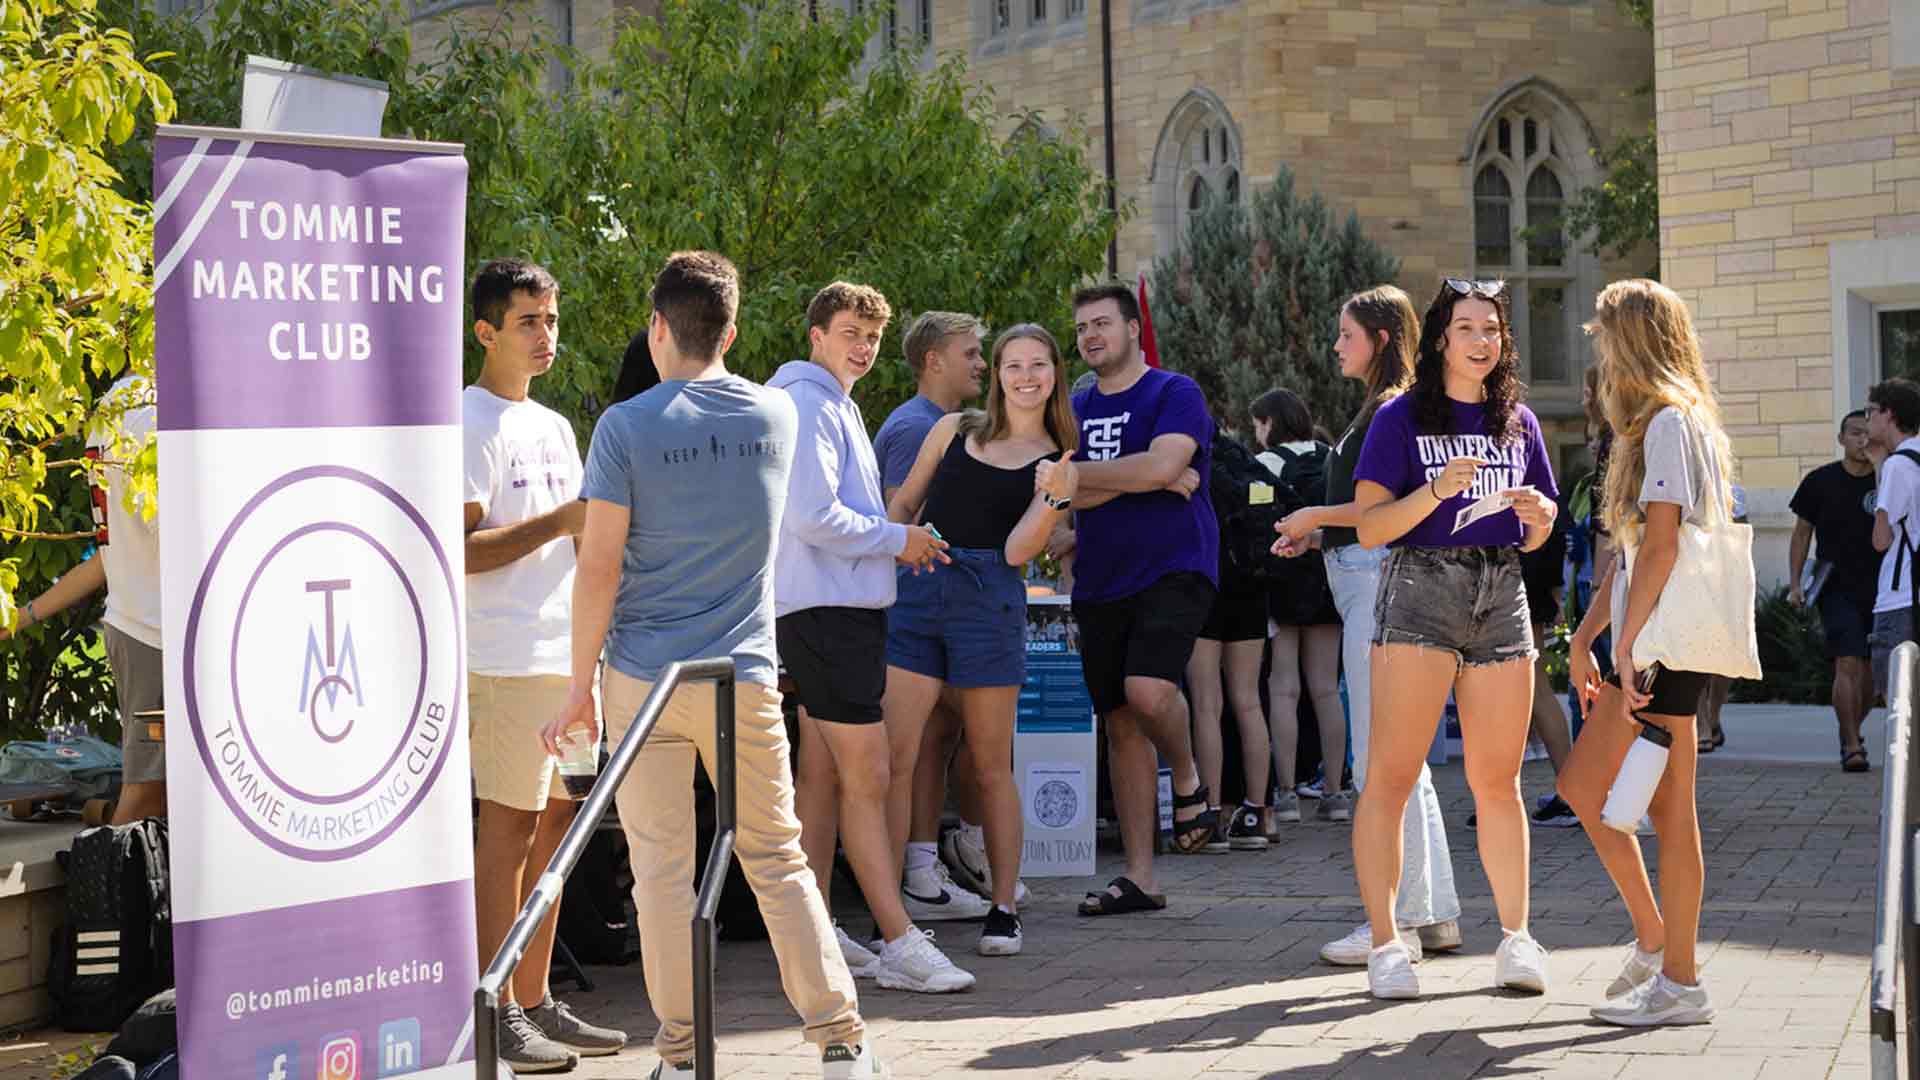 What are the best student organizations or clubs to join at